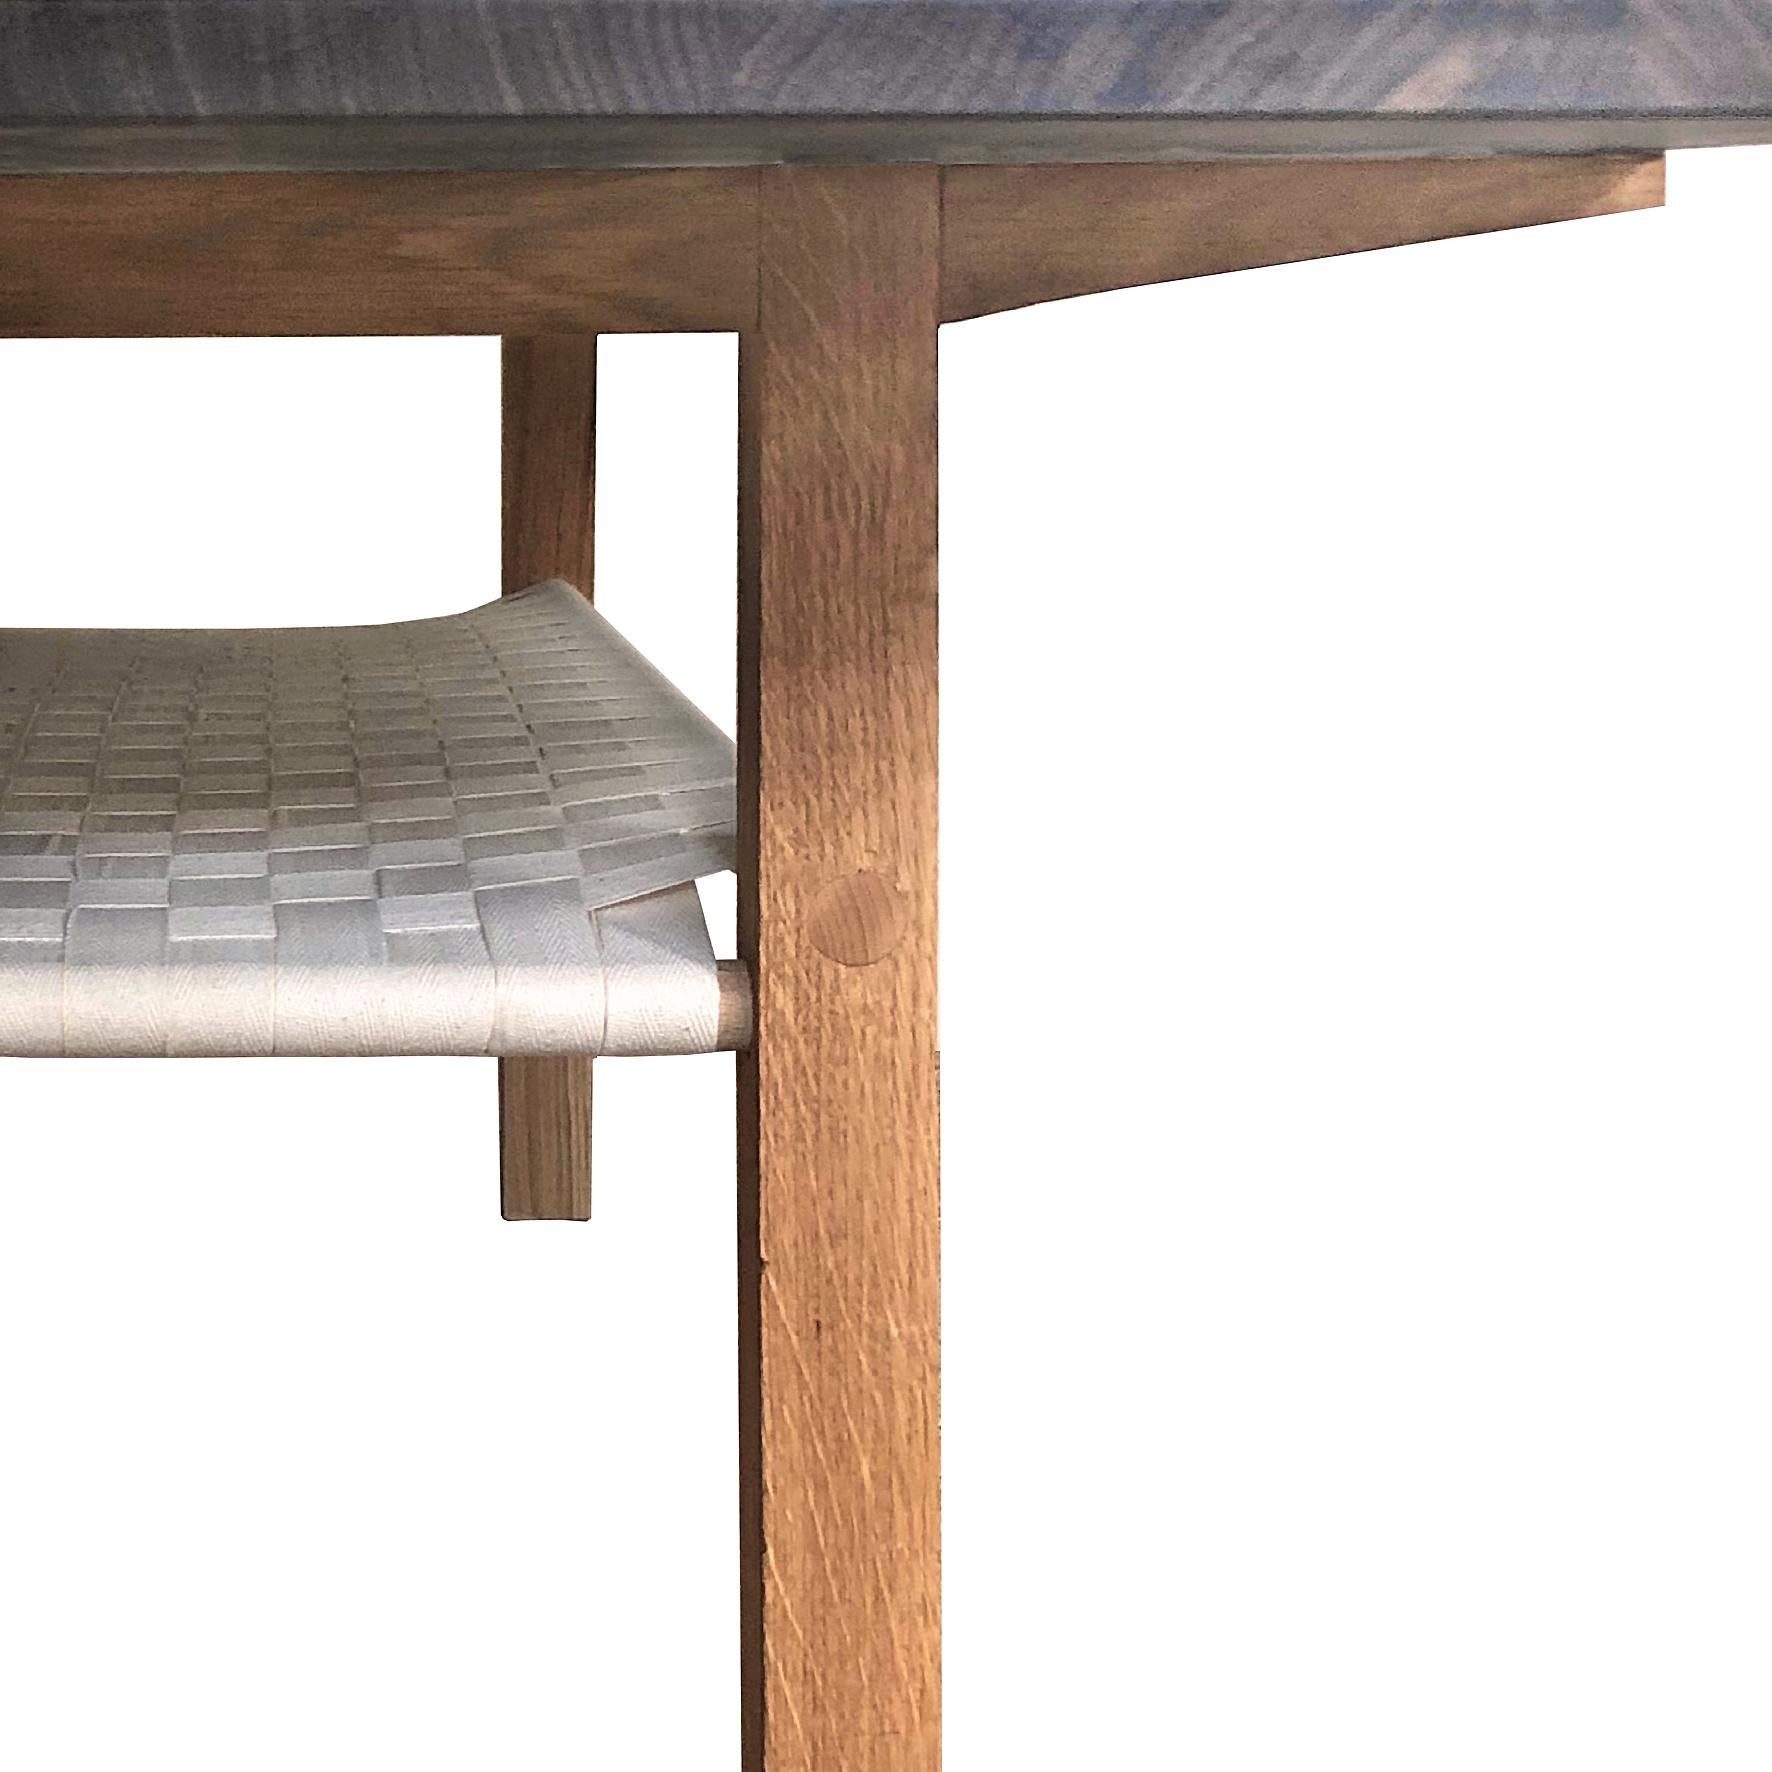 Matang

Parme

A low rectangular wood table.
The rectangular tabletop is made walnut, on four oak legs joined by a cotton tier.

Contemporary production.
Lead time : 8/9 weeks.

Matang

Matang is an architectural and furniture practice